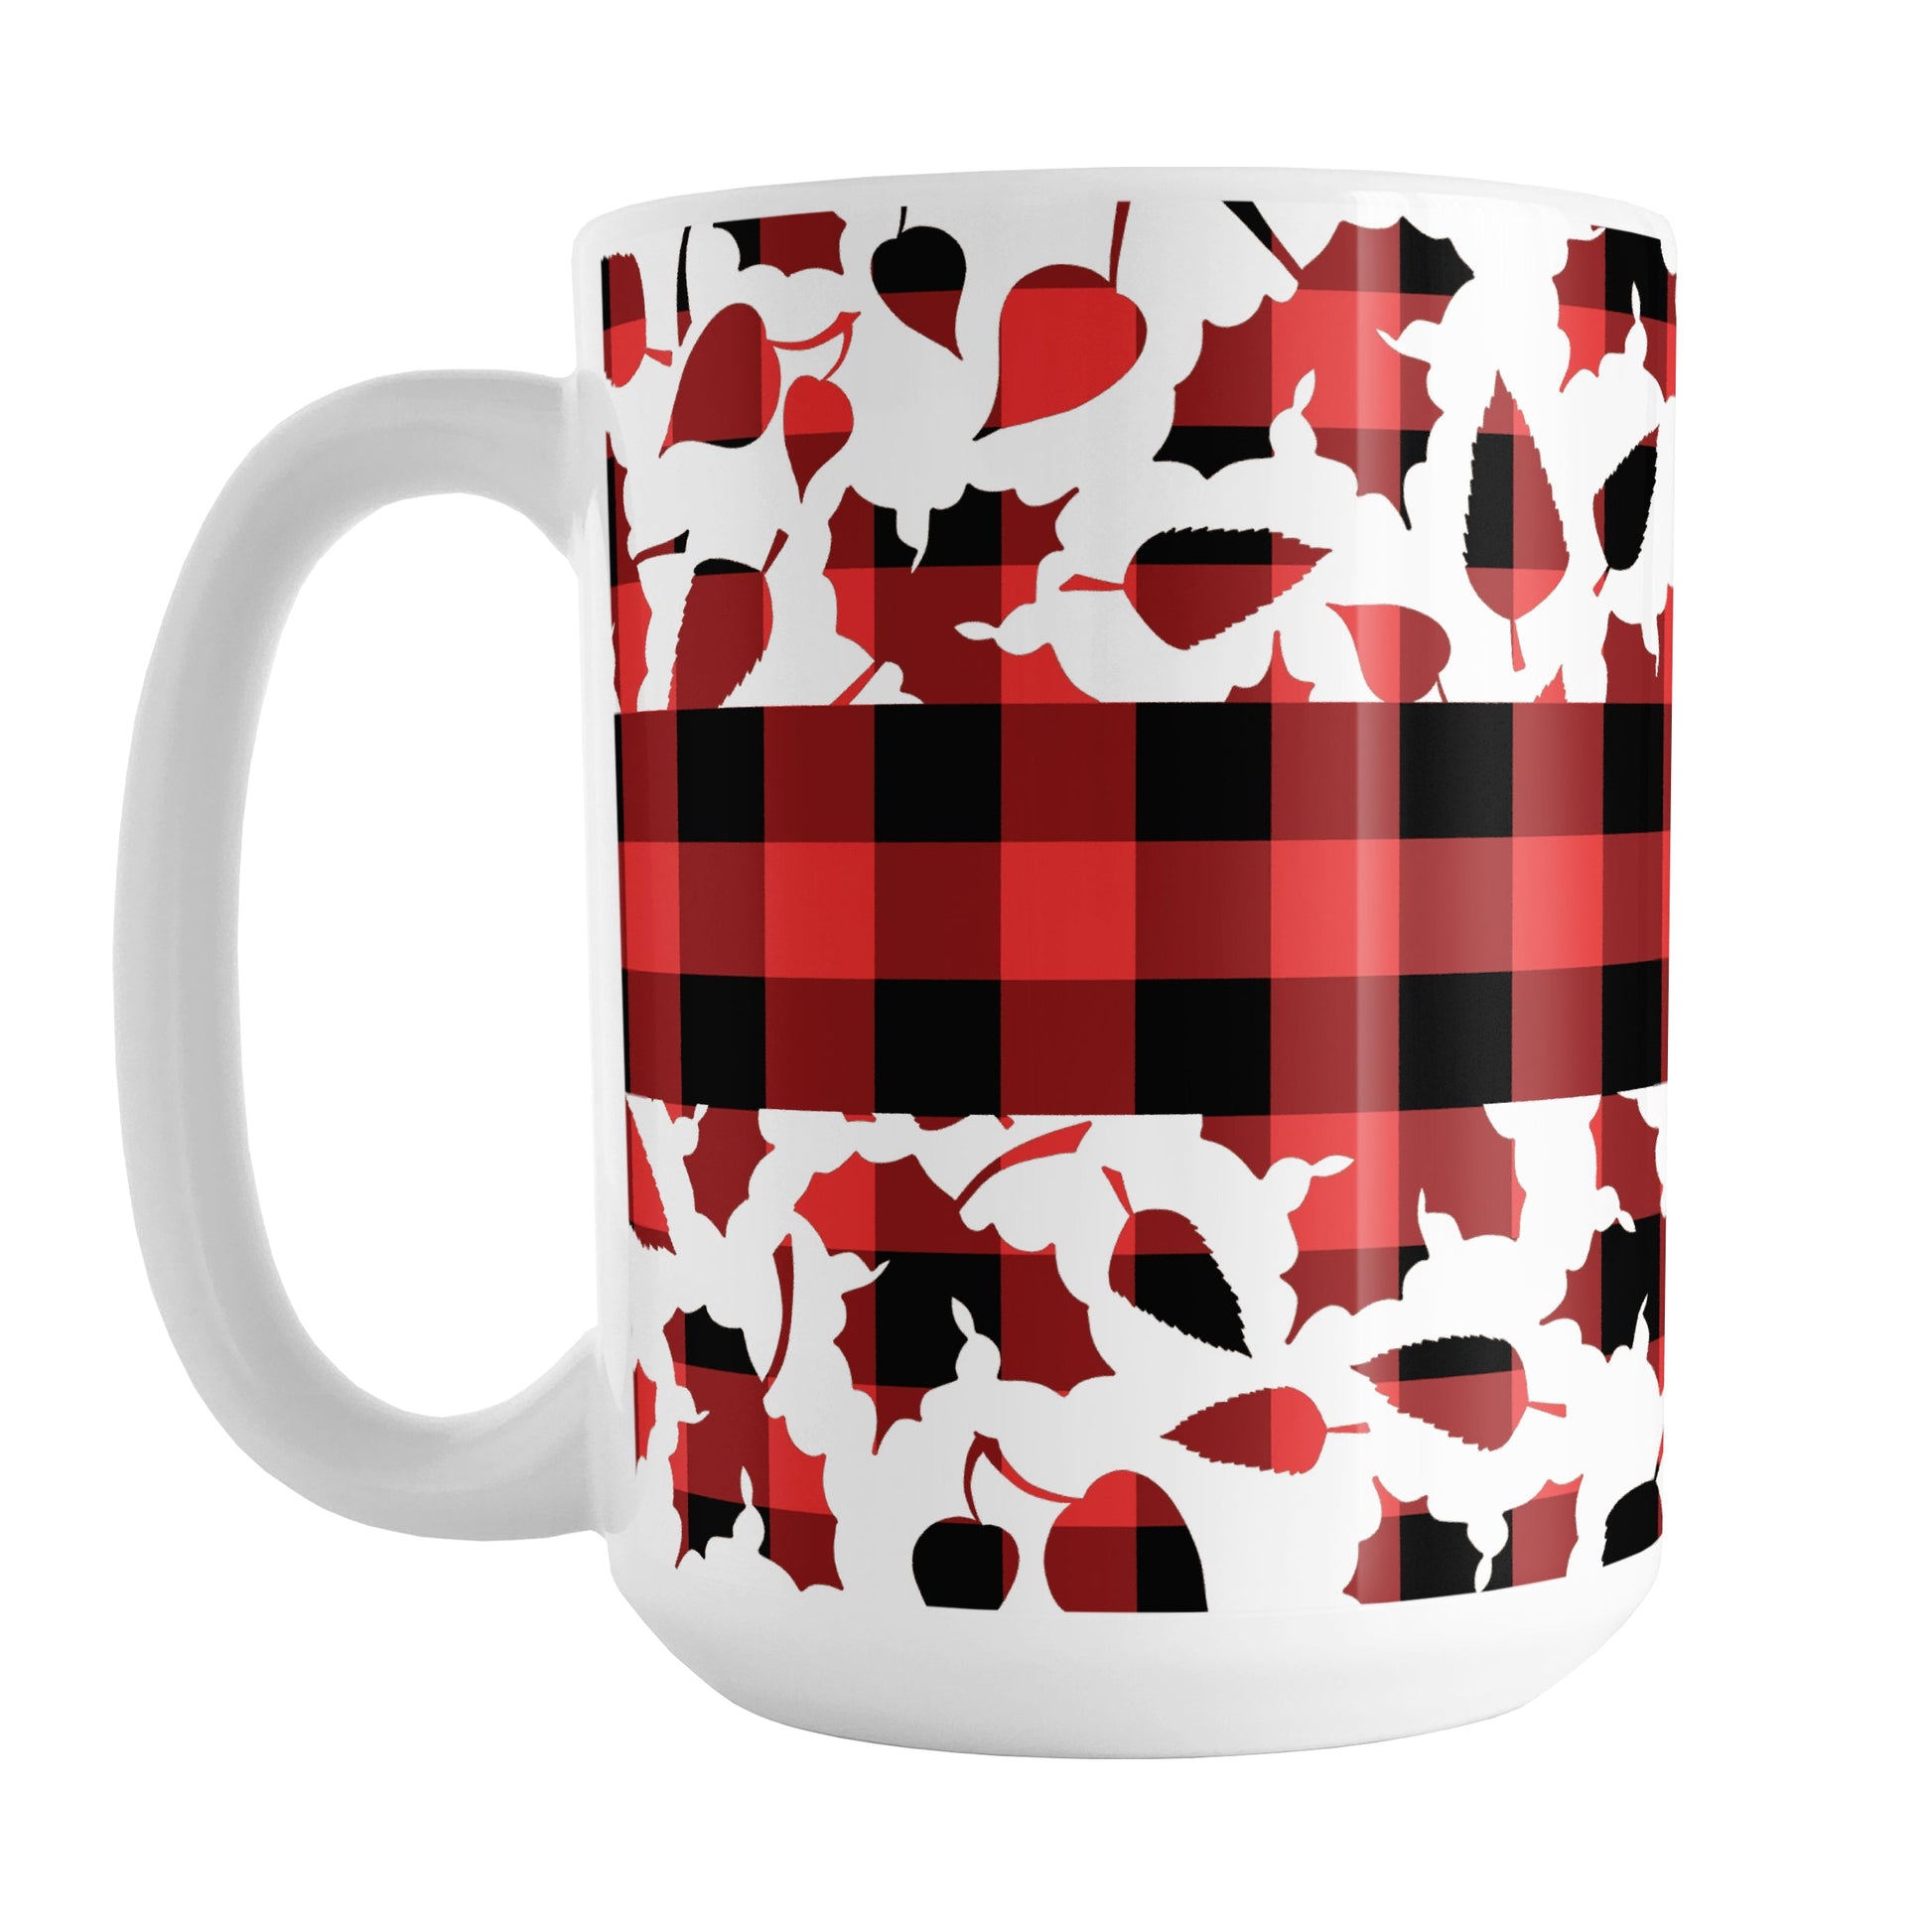 Buffalo Plaid Leaves Fall Mug (15oz) at Amy's Coffee Mugs. A ceramic coffee mug designed with a pattern of leaves with a red and black buffalo plaid pattern and a buffalo plaid stripe across the center over the leaves. This design wraps around the mug to the handle.